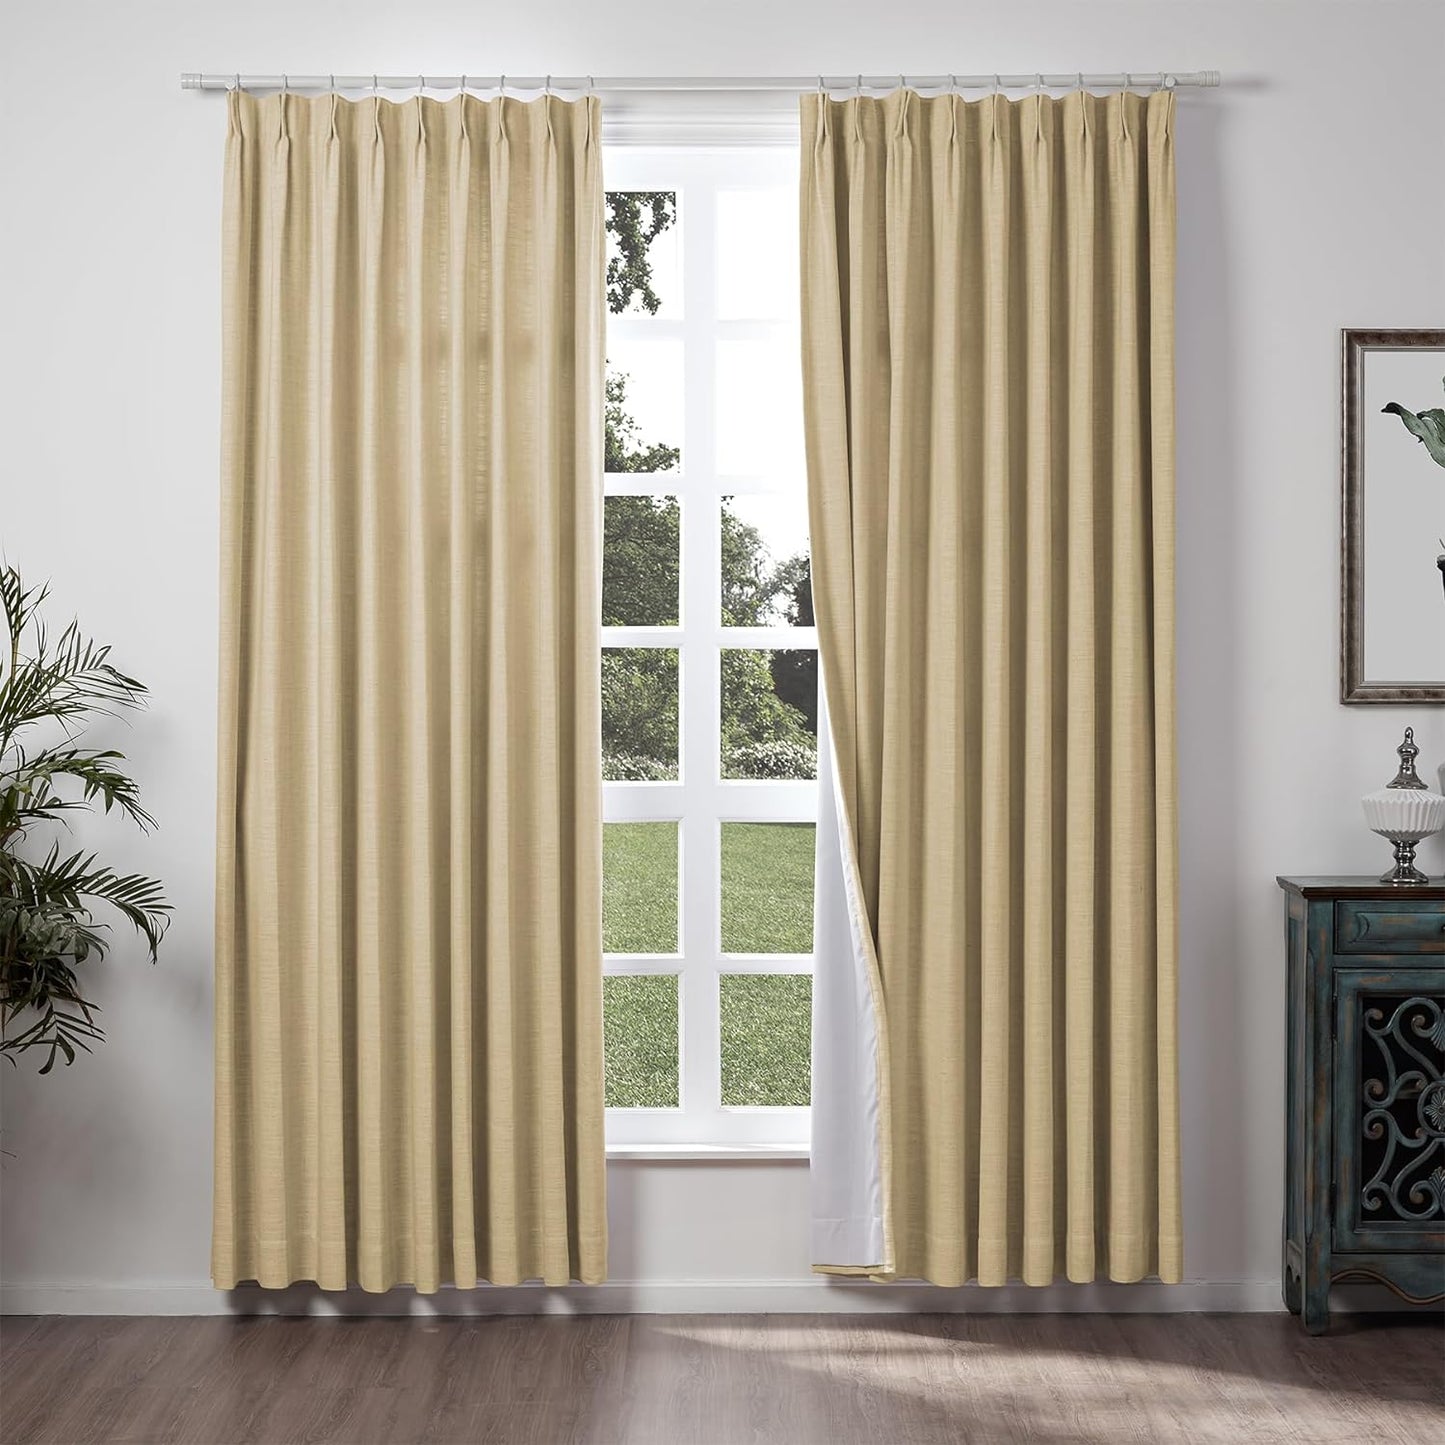 Chadmade 50" W X 84" L Polyester Linen Drape with Blackout Lining Pinch Pleat Curtain for Sliding Door Patio Door Living Room Bedroom, (1 Panel) Beige White Liz Collection  ChadMade Khaki Yellow (27) 72Wx102L 